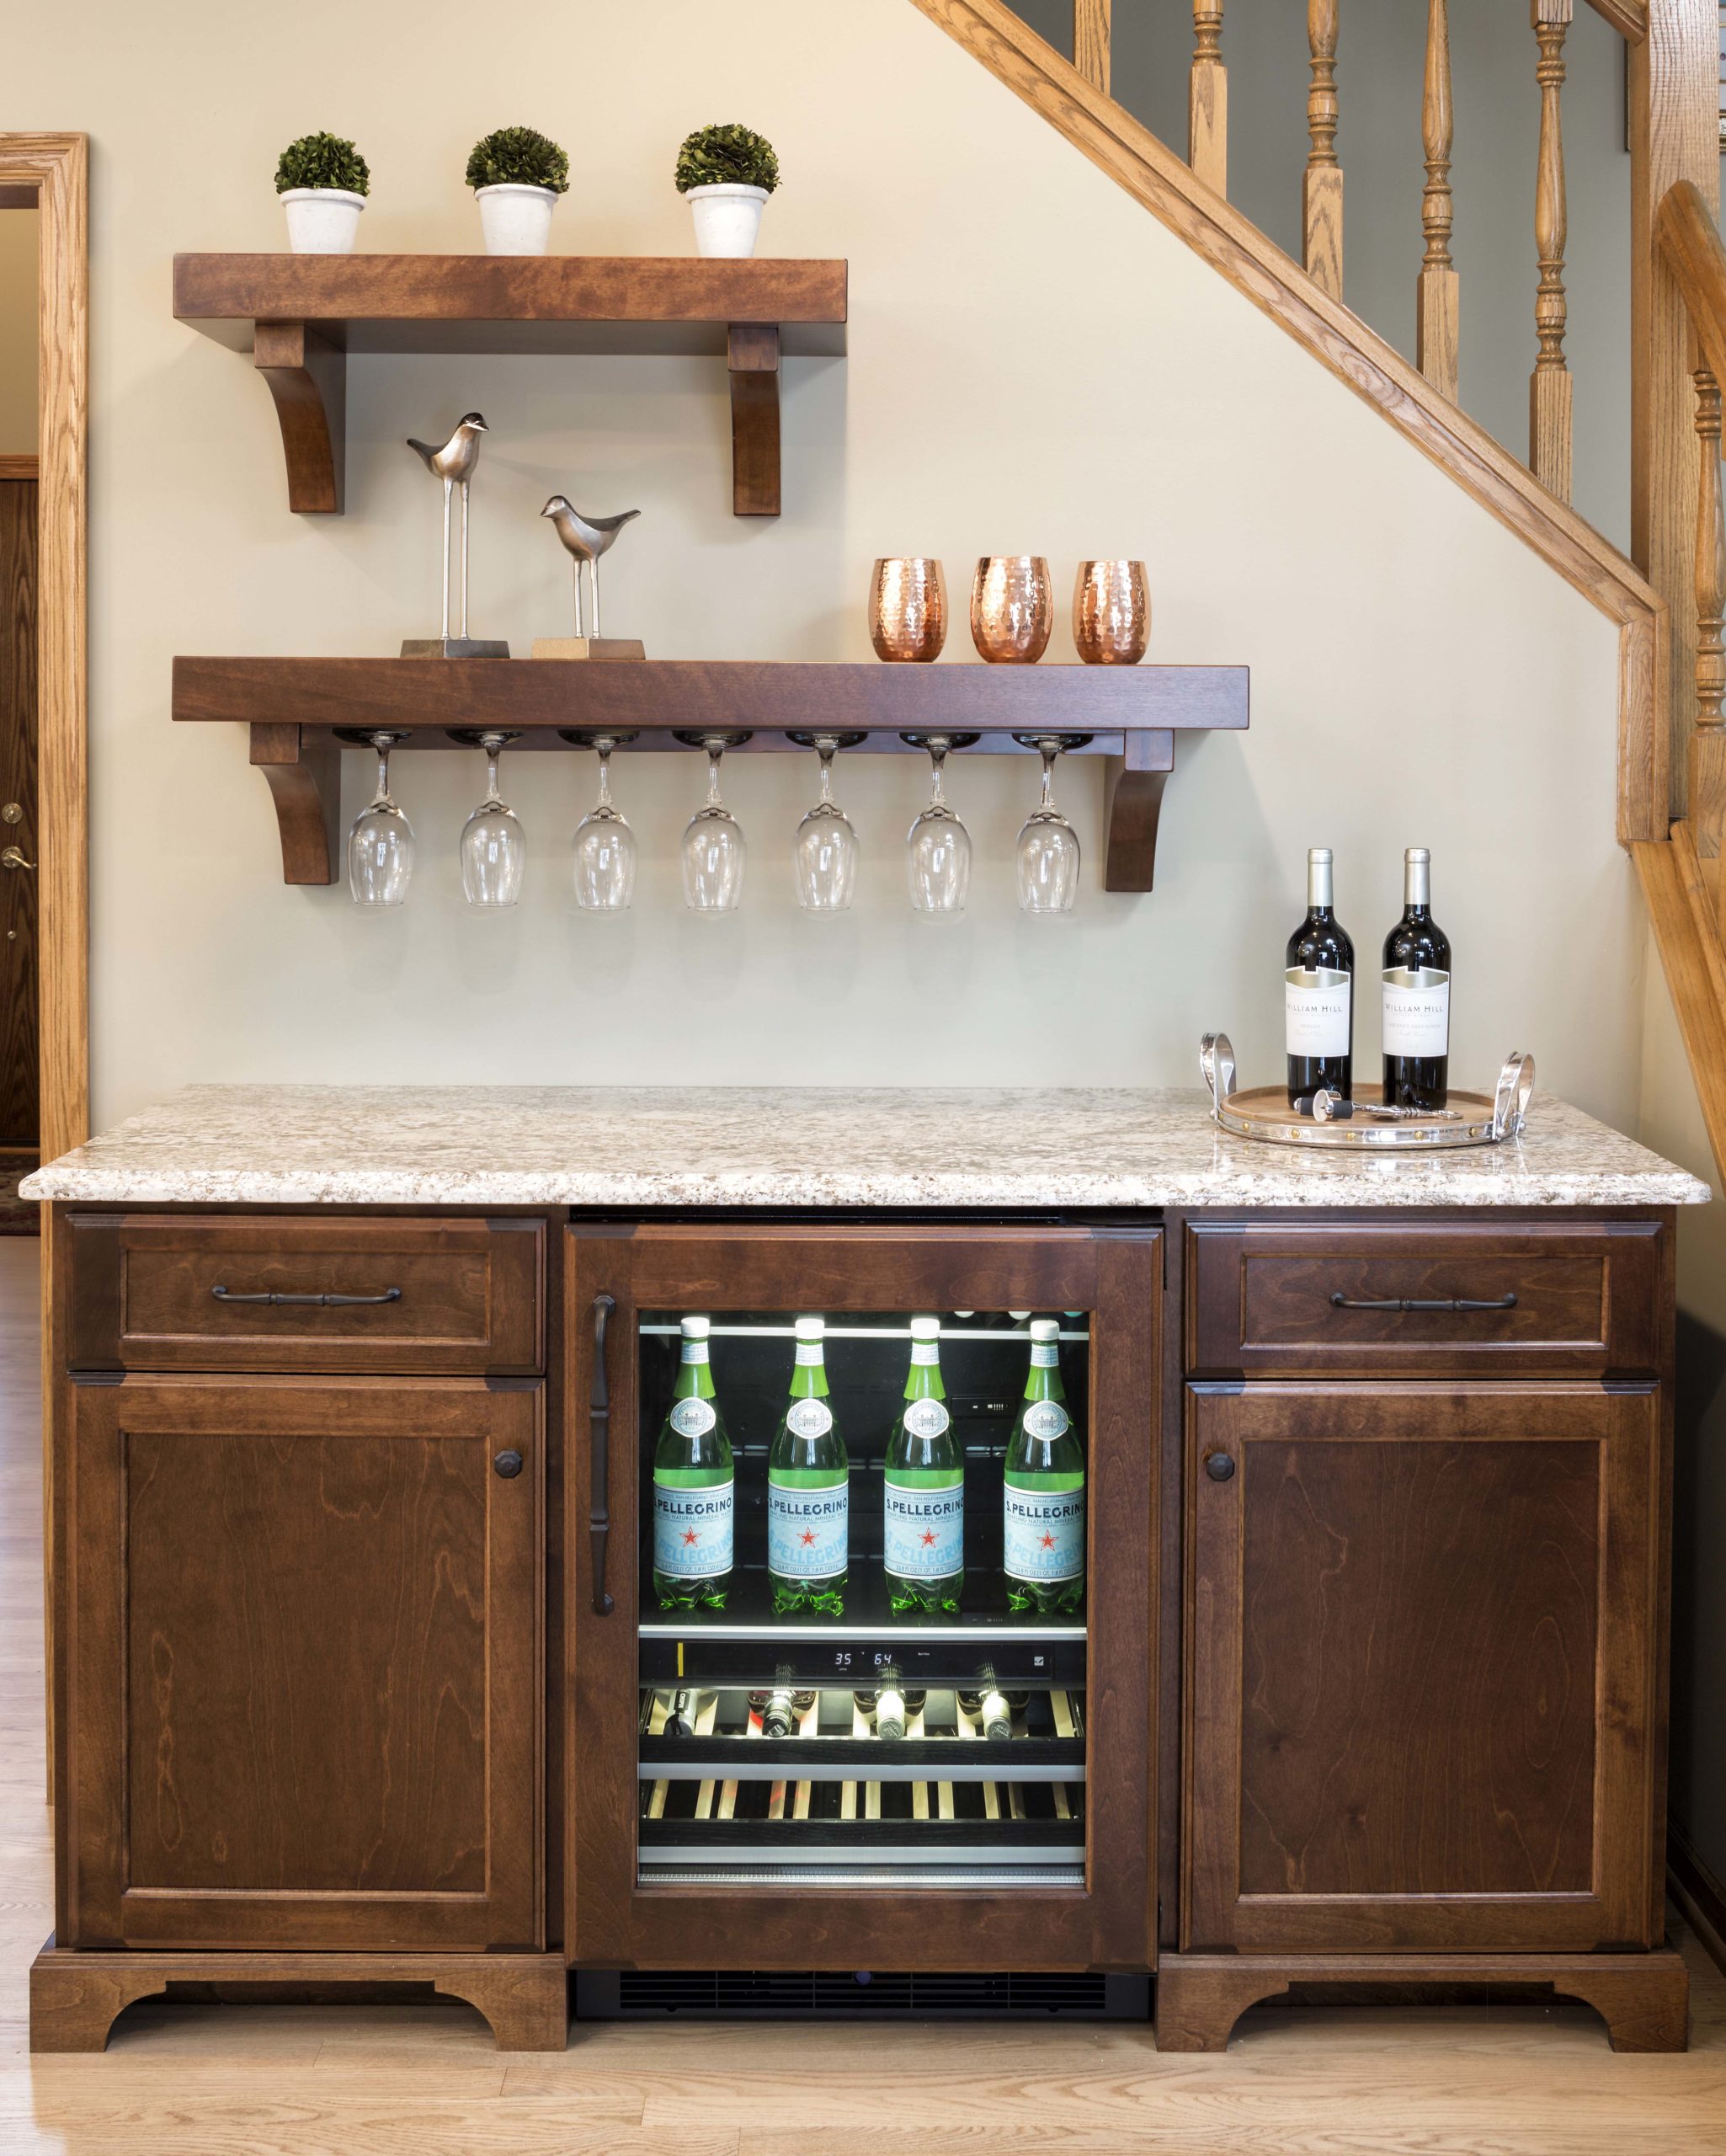 A wine cooler under a staircase in a home.